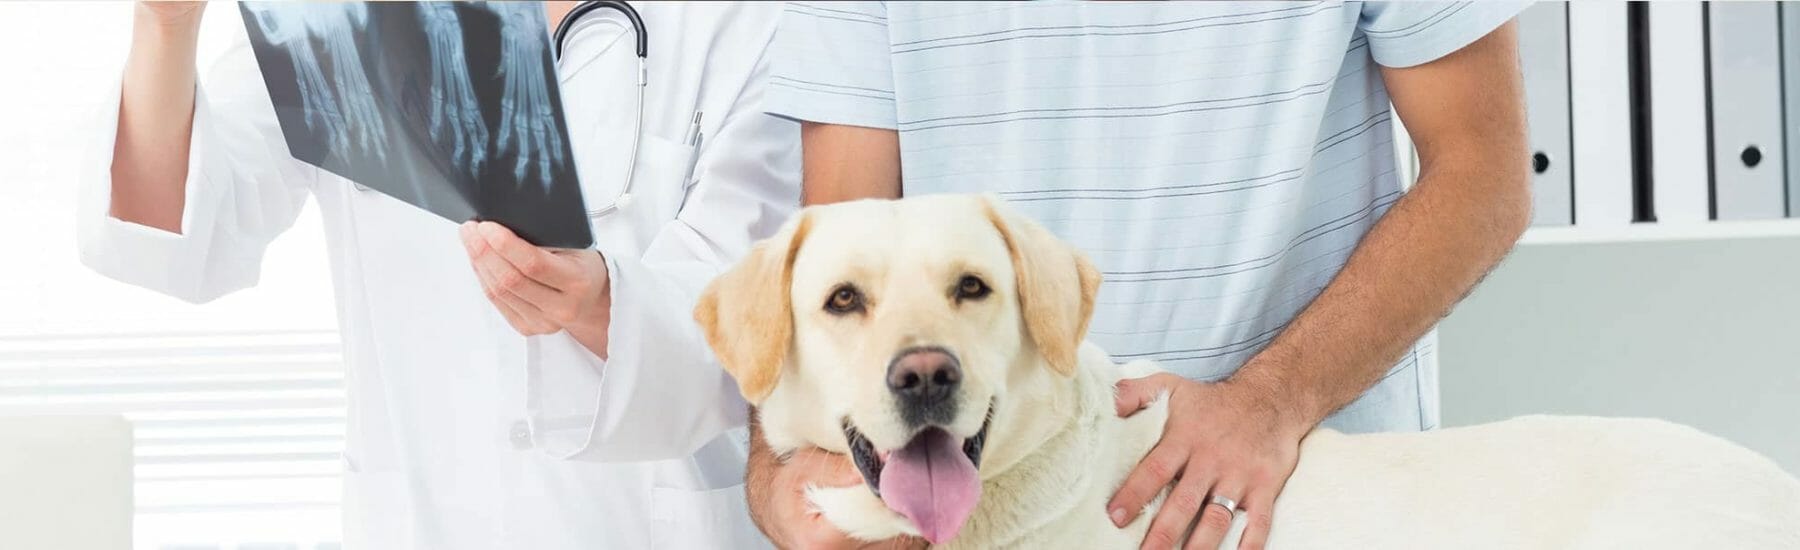 White dog looking towards camera while a vet looks at an xray